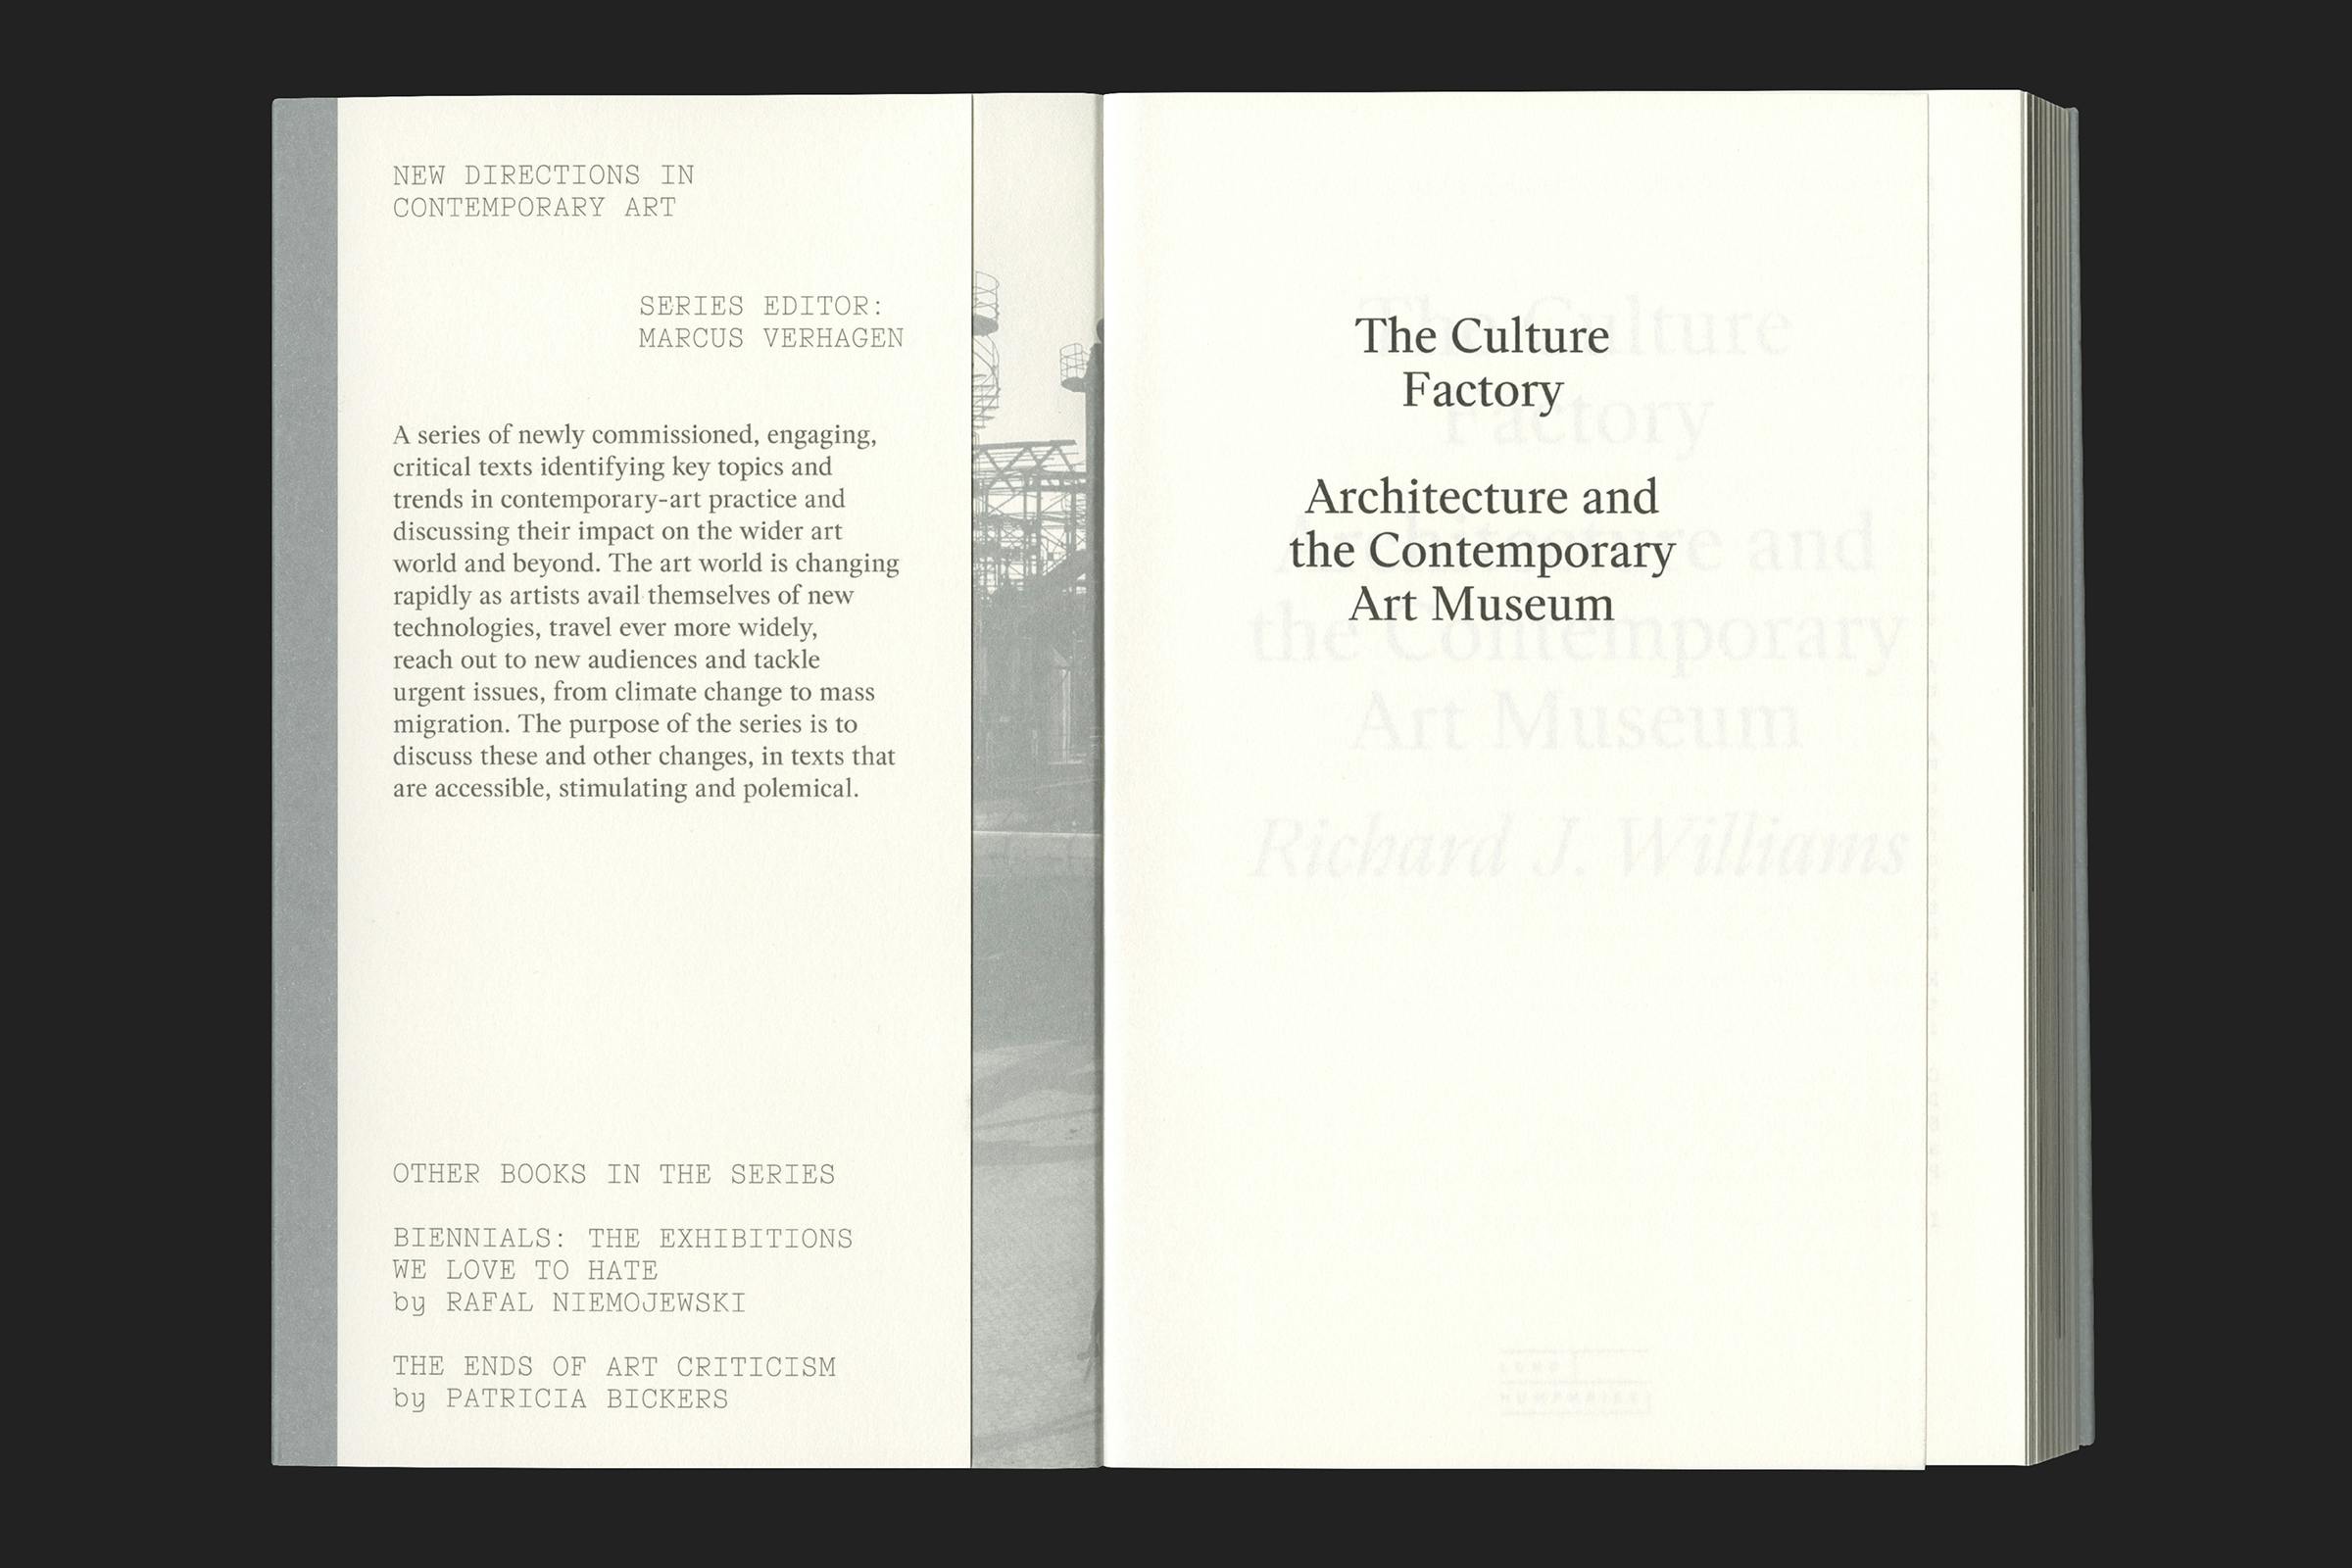 New Directions in Contemporary Art, Lund Humphries, Publication, Graphic Design by Wolfe Hall